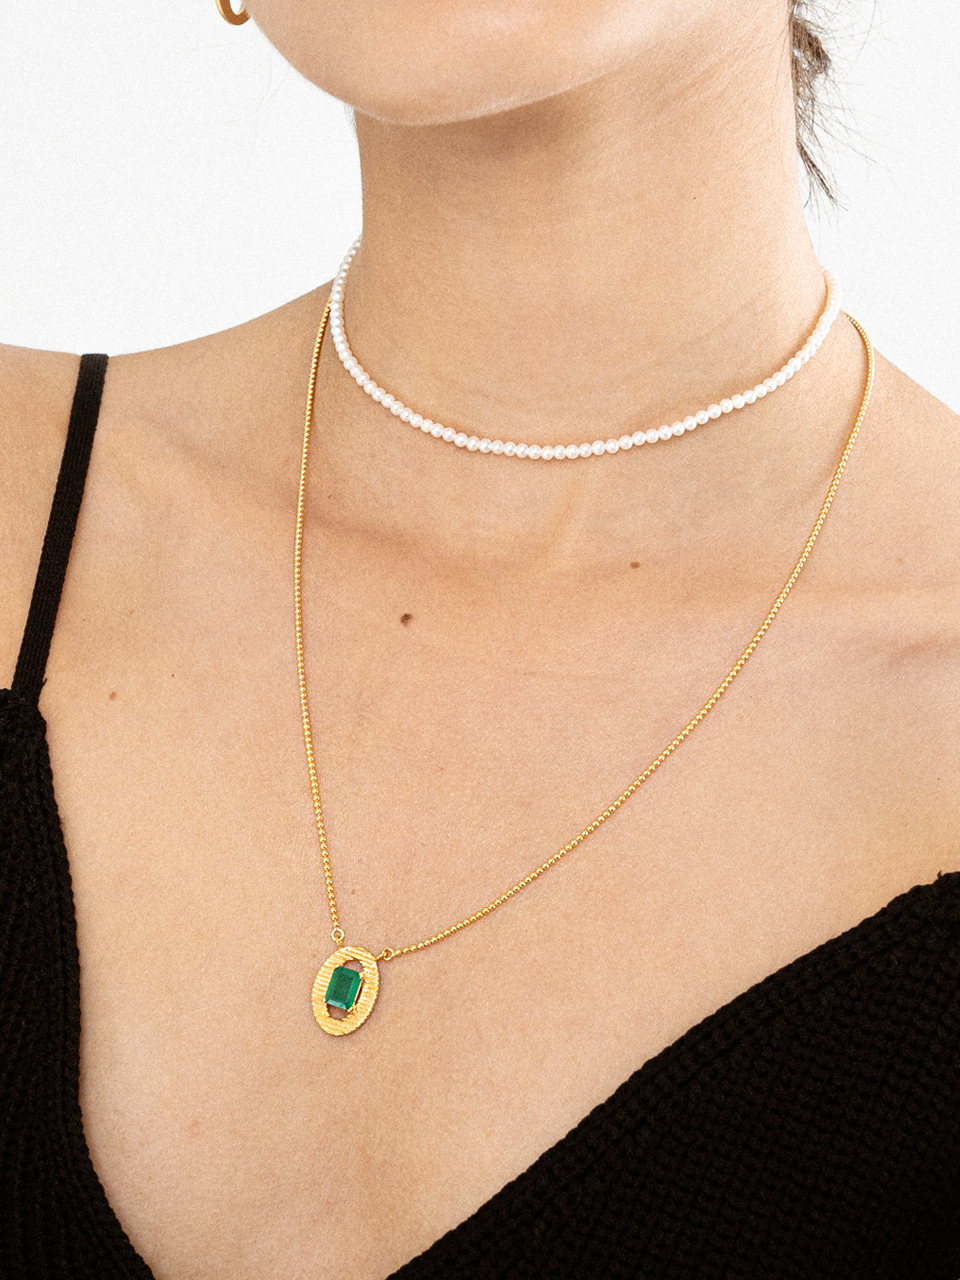 green onyx necklace